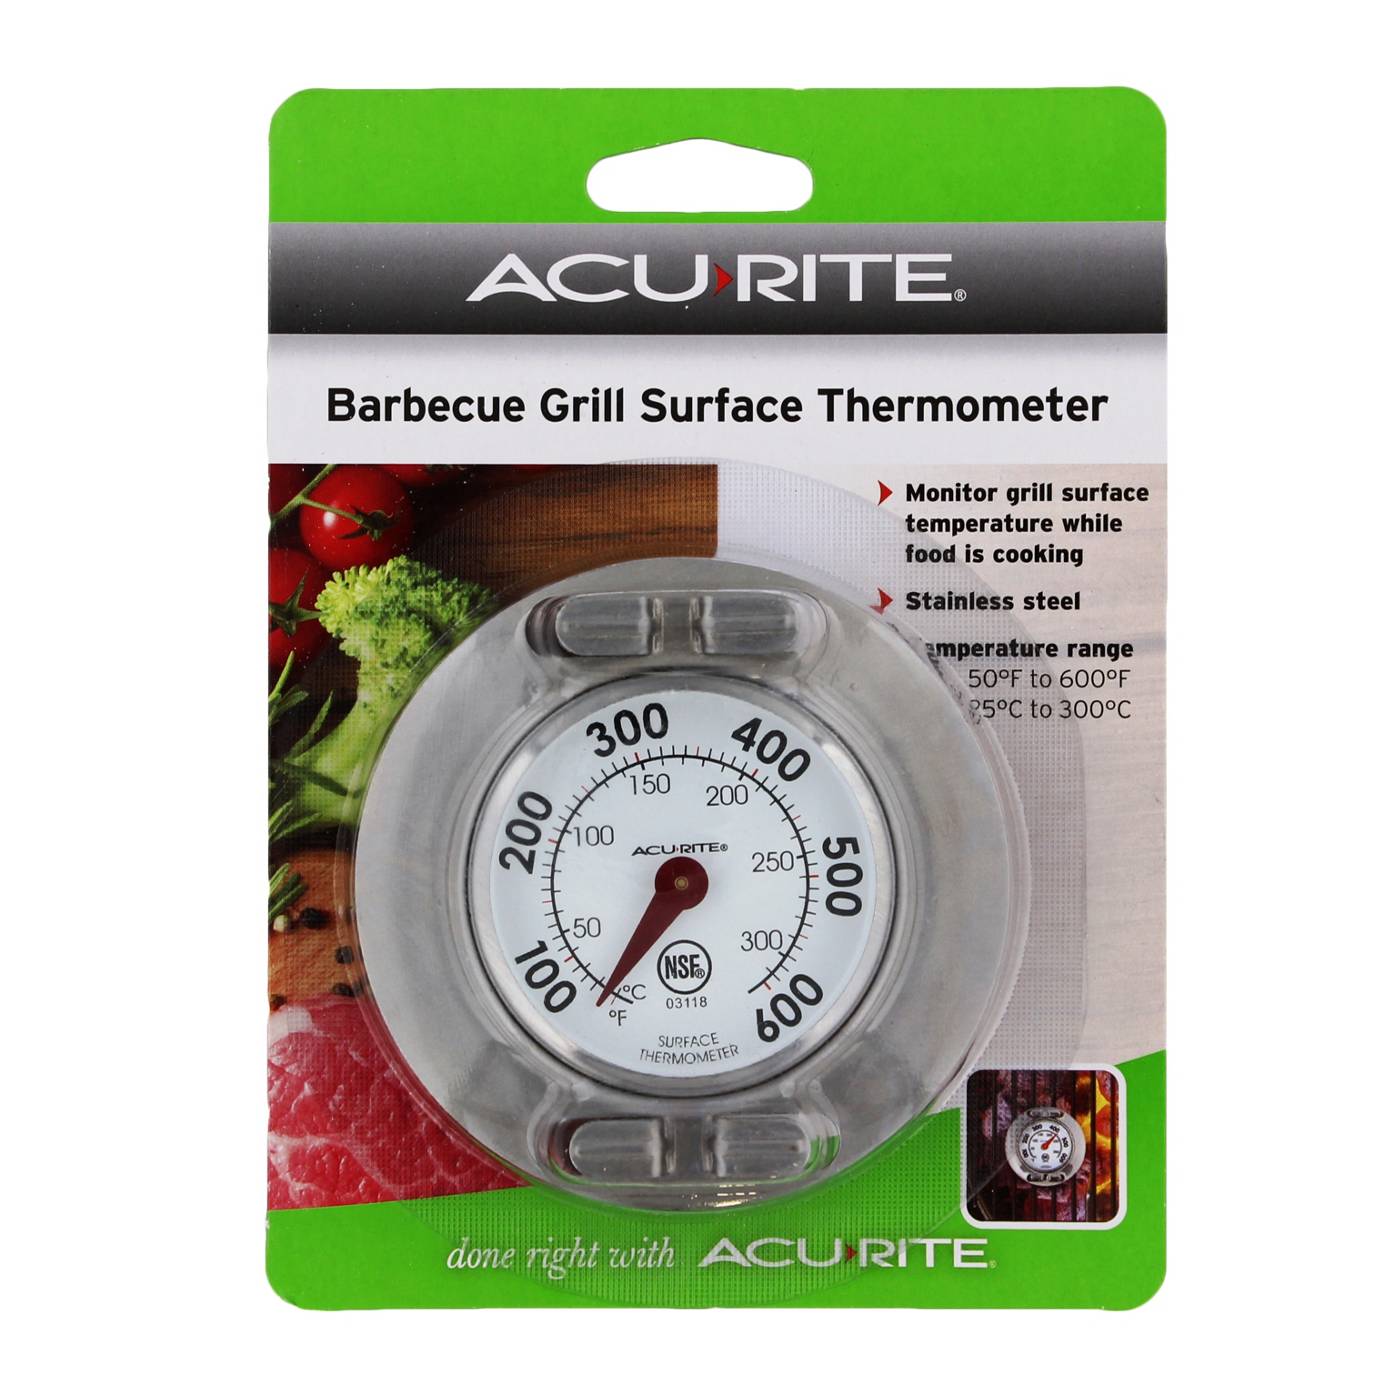 Grill-Surface Thermometer